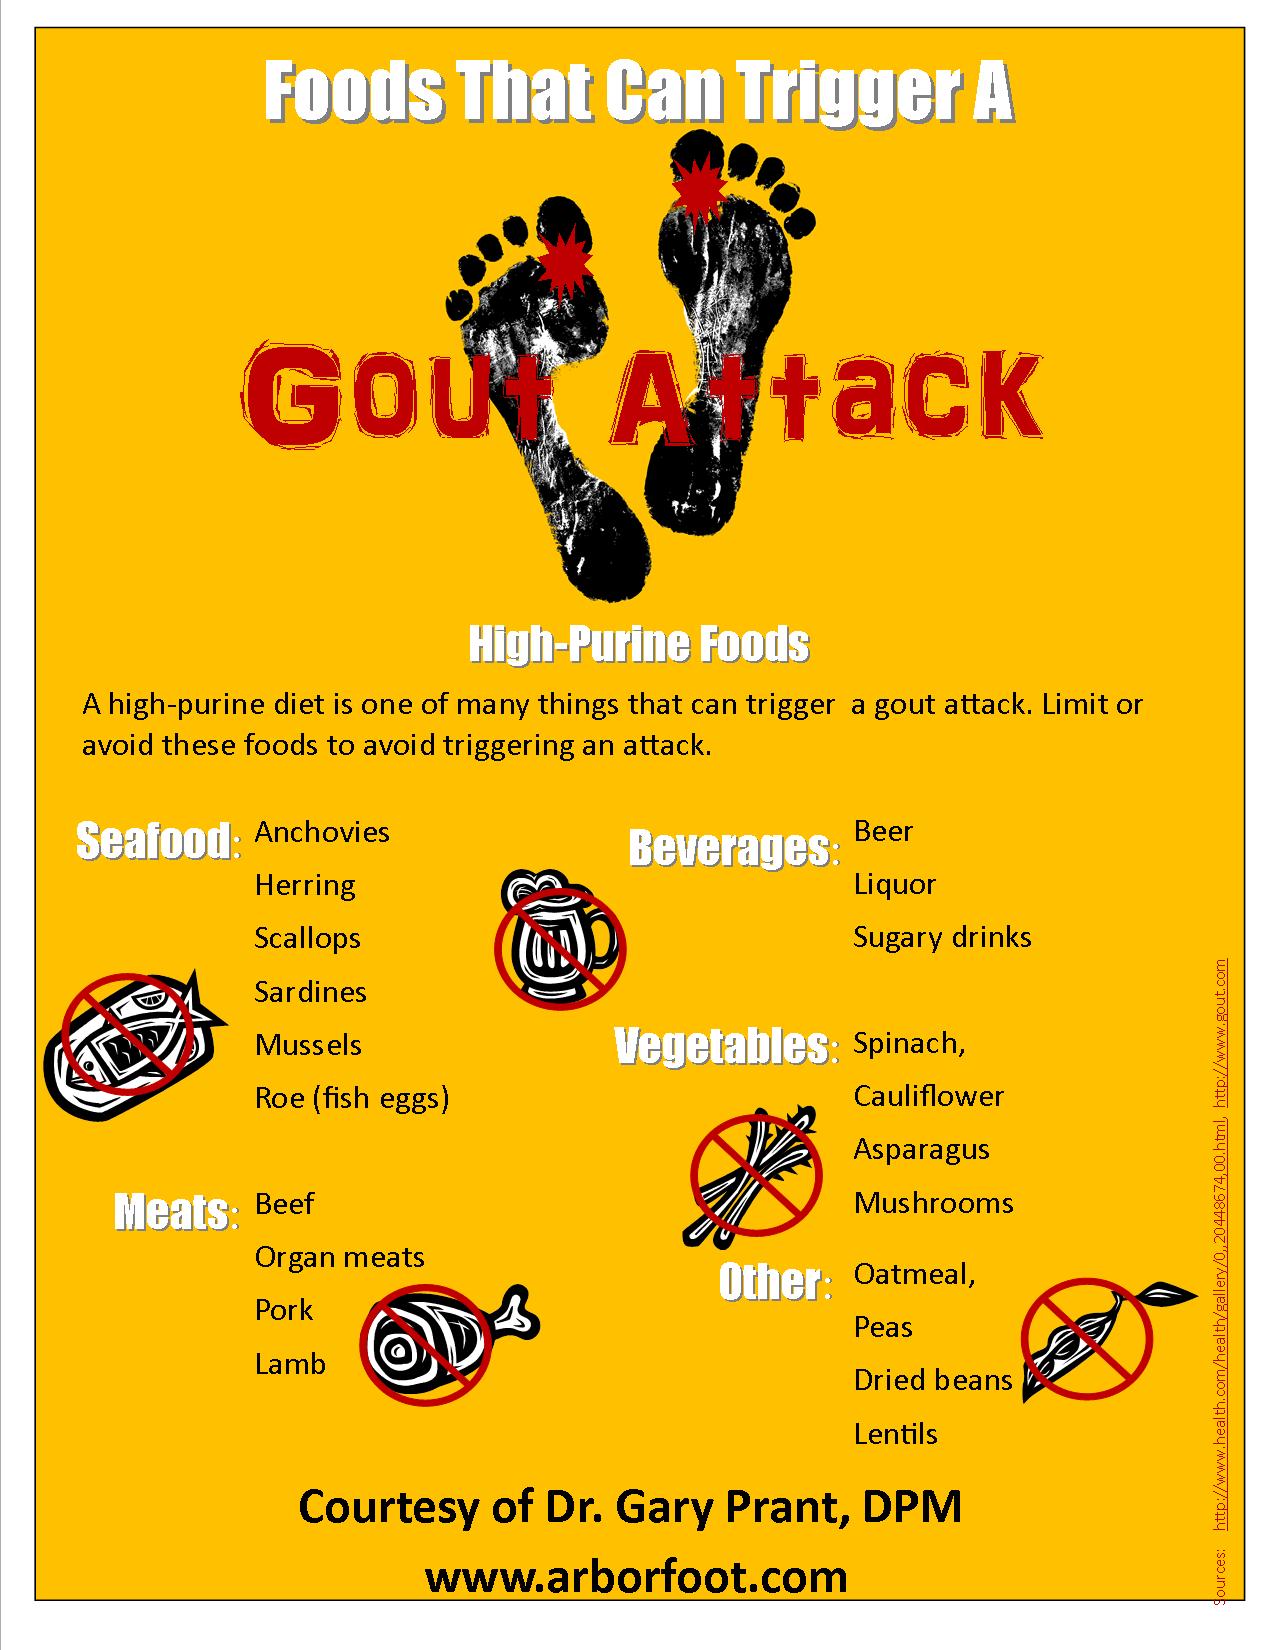 List of Foods that can Trigger a Gout Attack